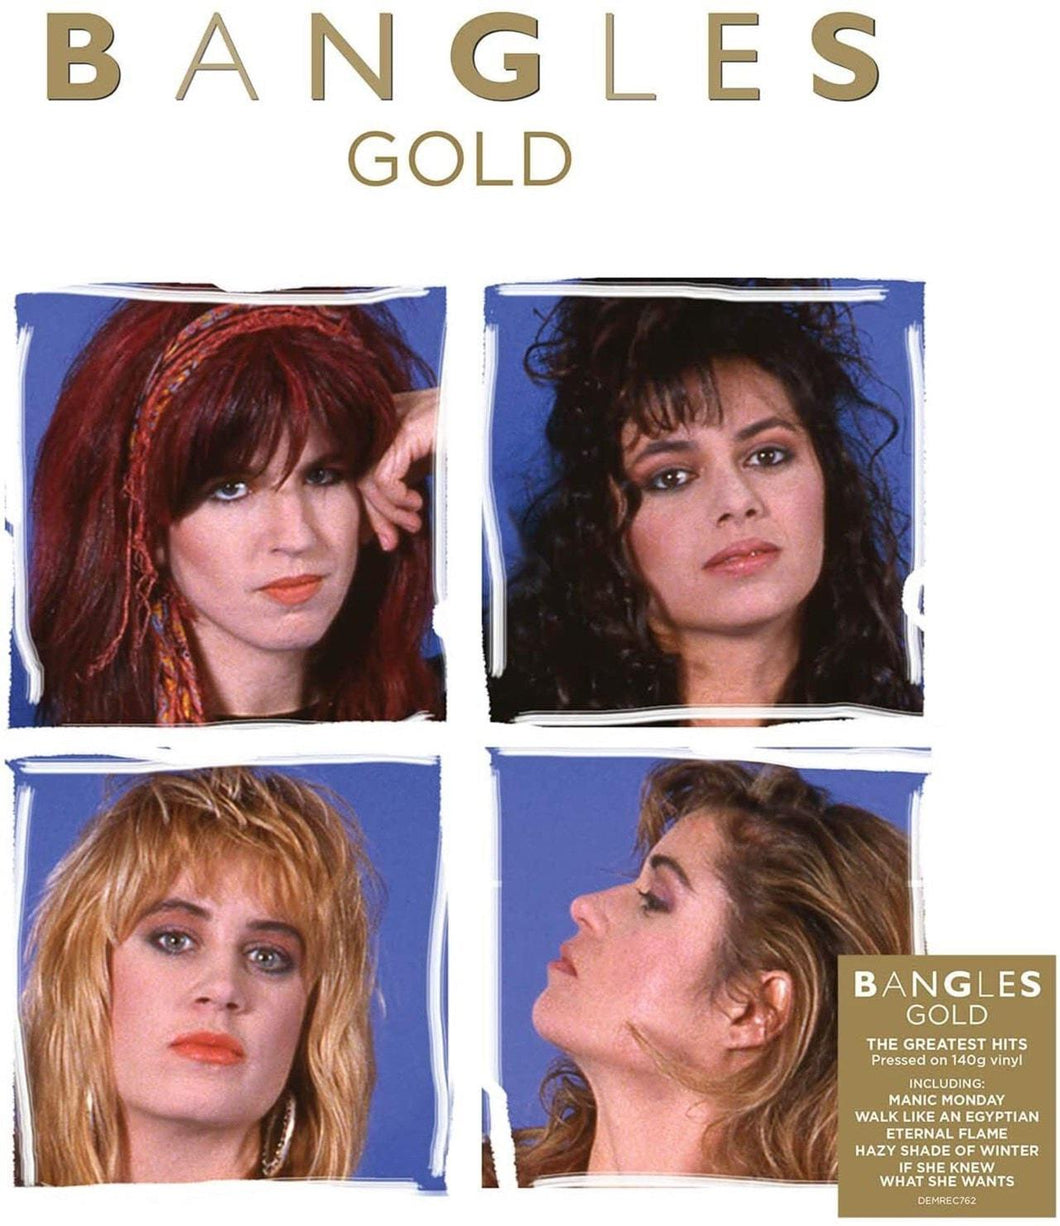 The Bangles - Gold